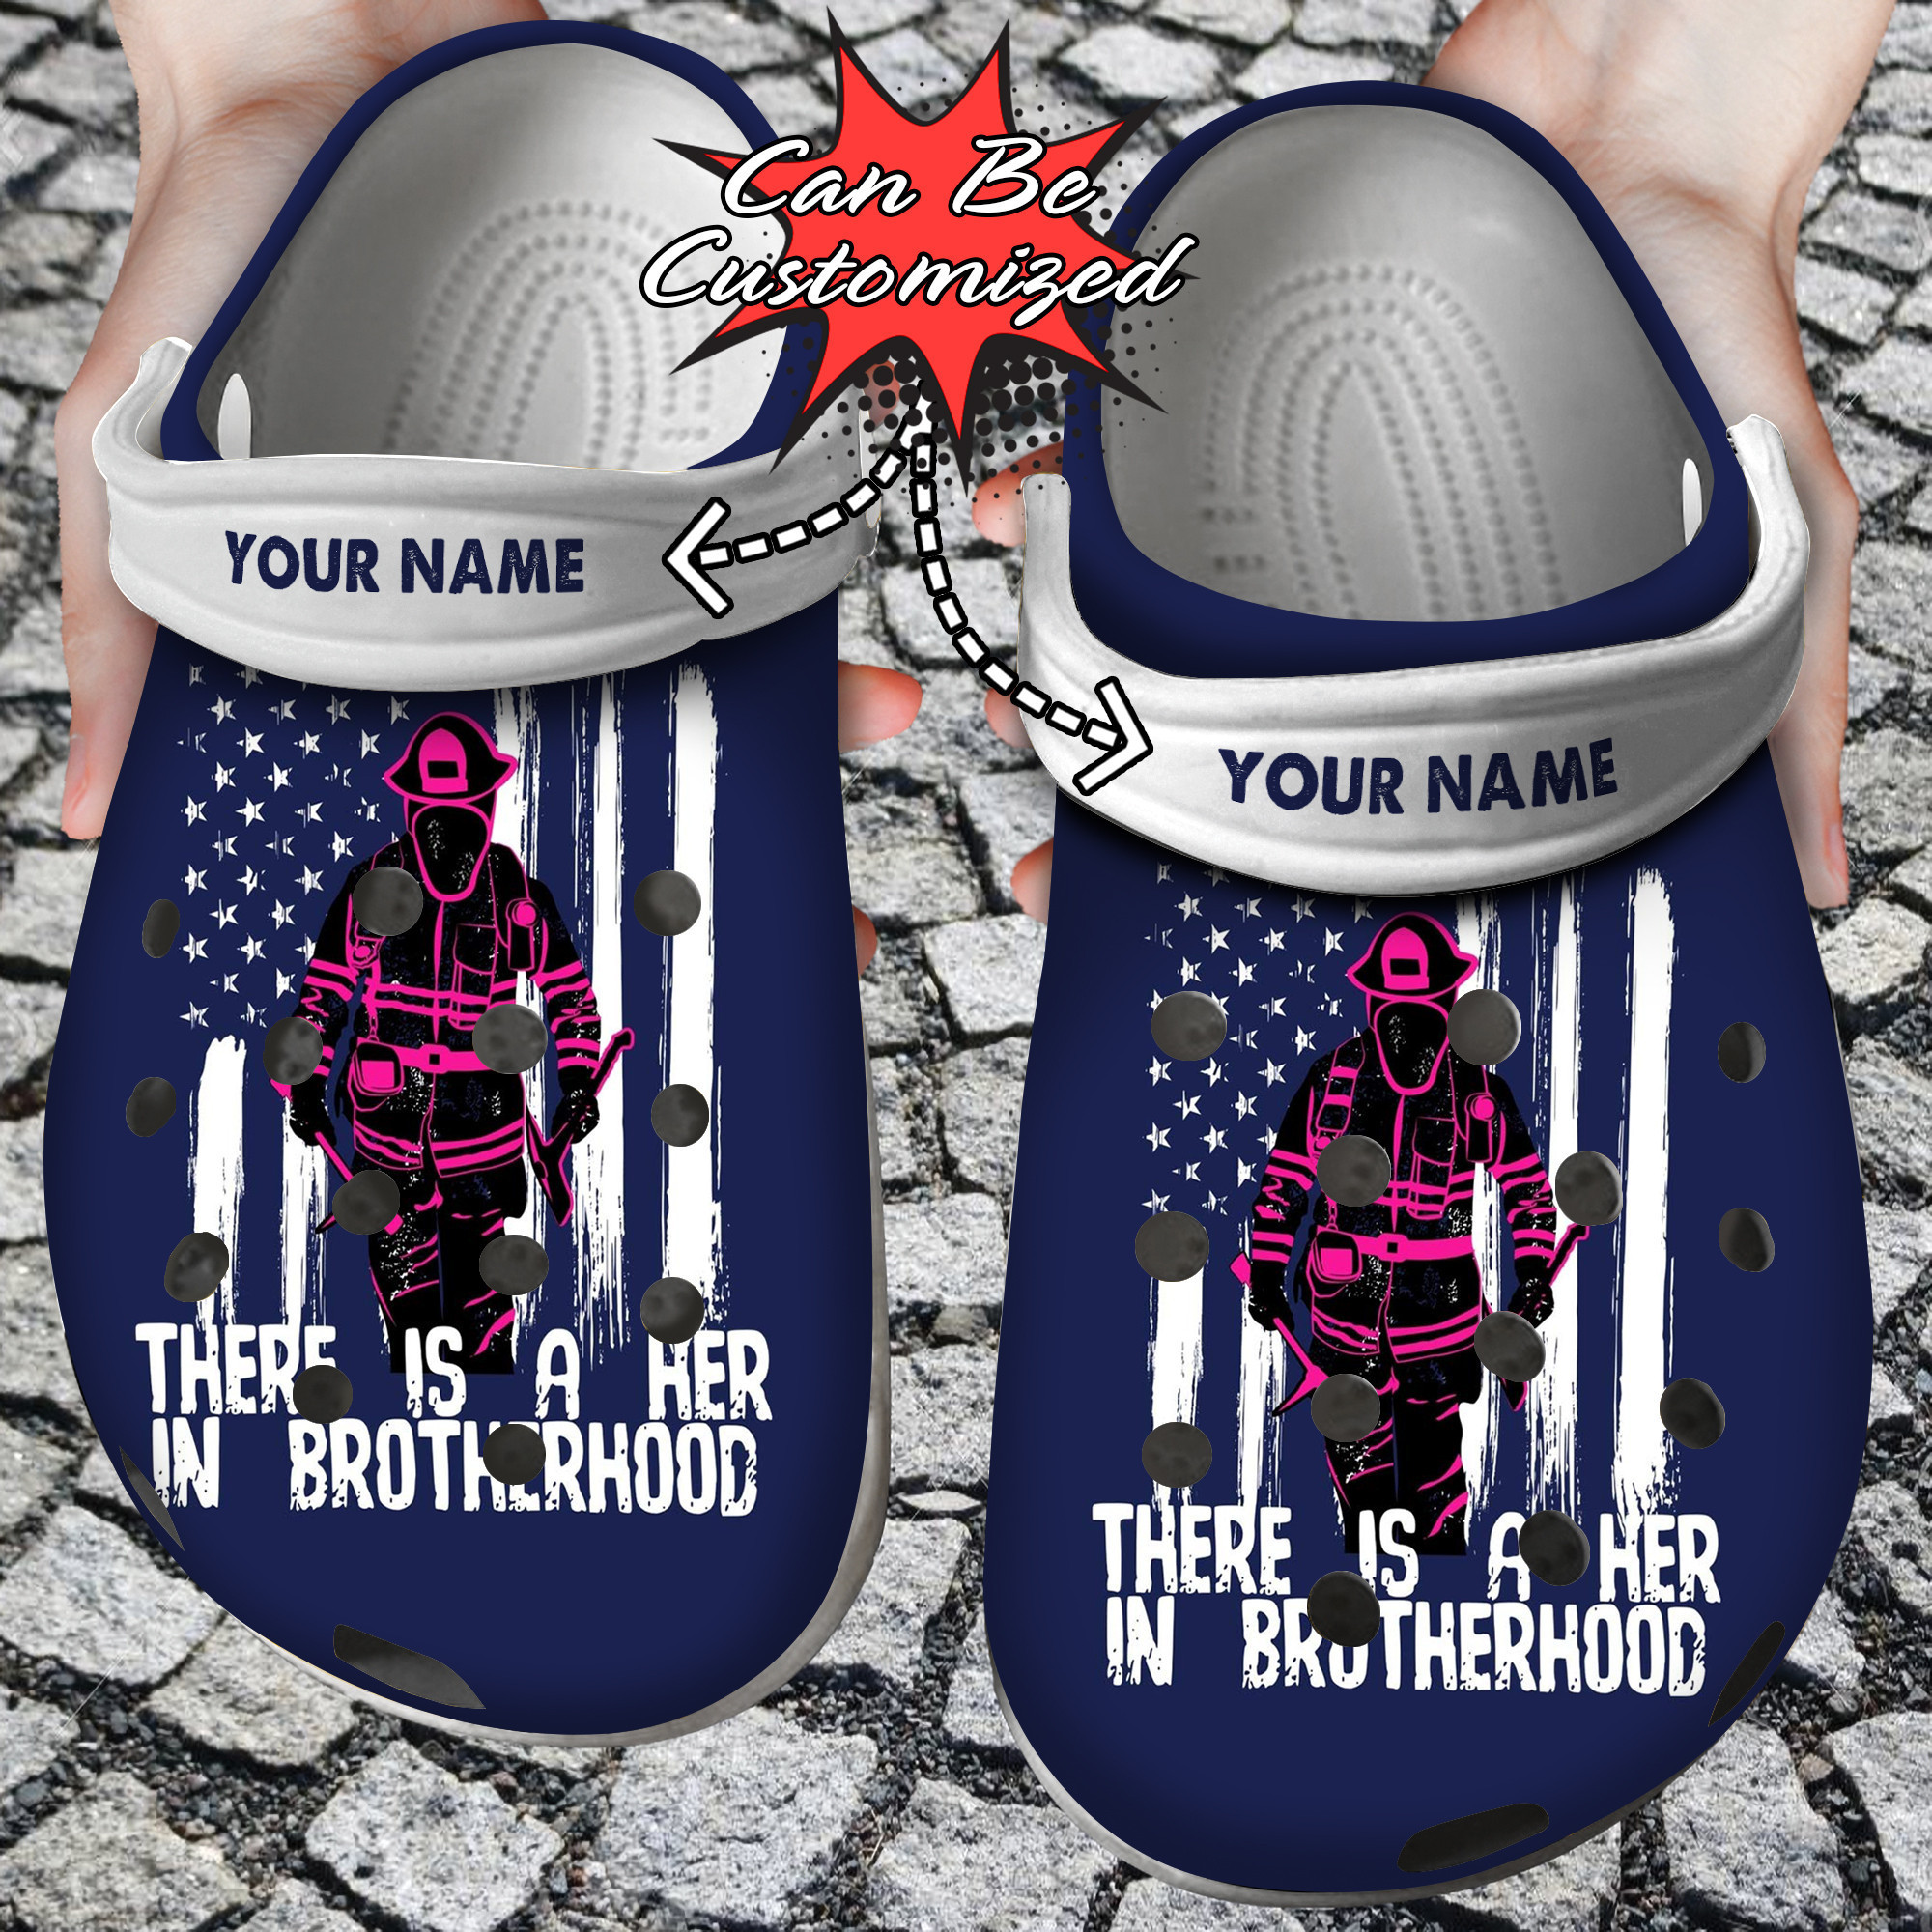 Firefighter Crocs Personalized There Is A Her In Brotherhood Clog Shoes